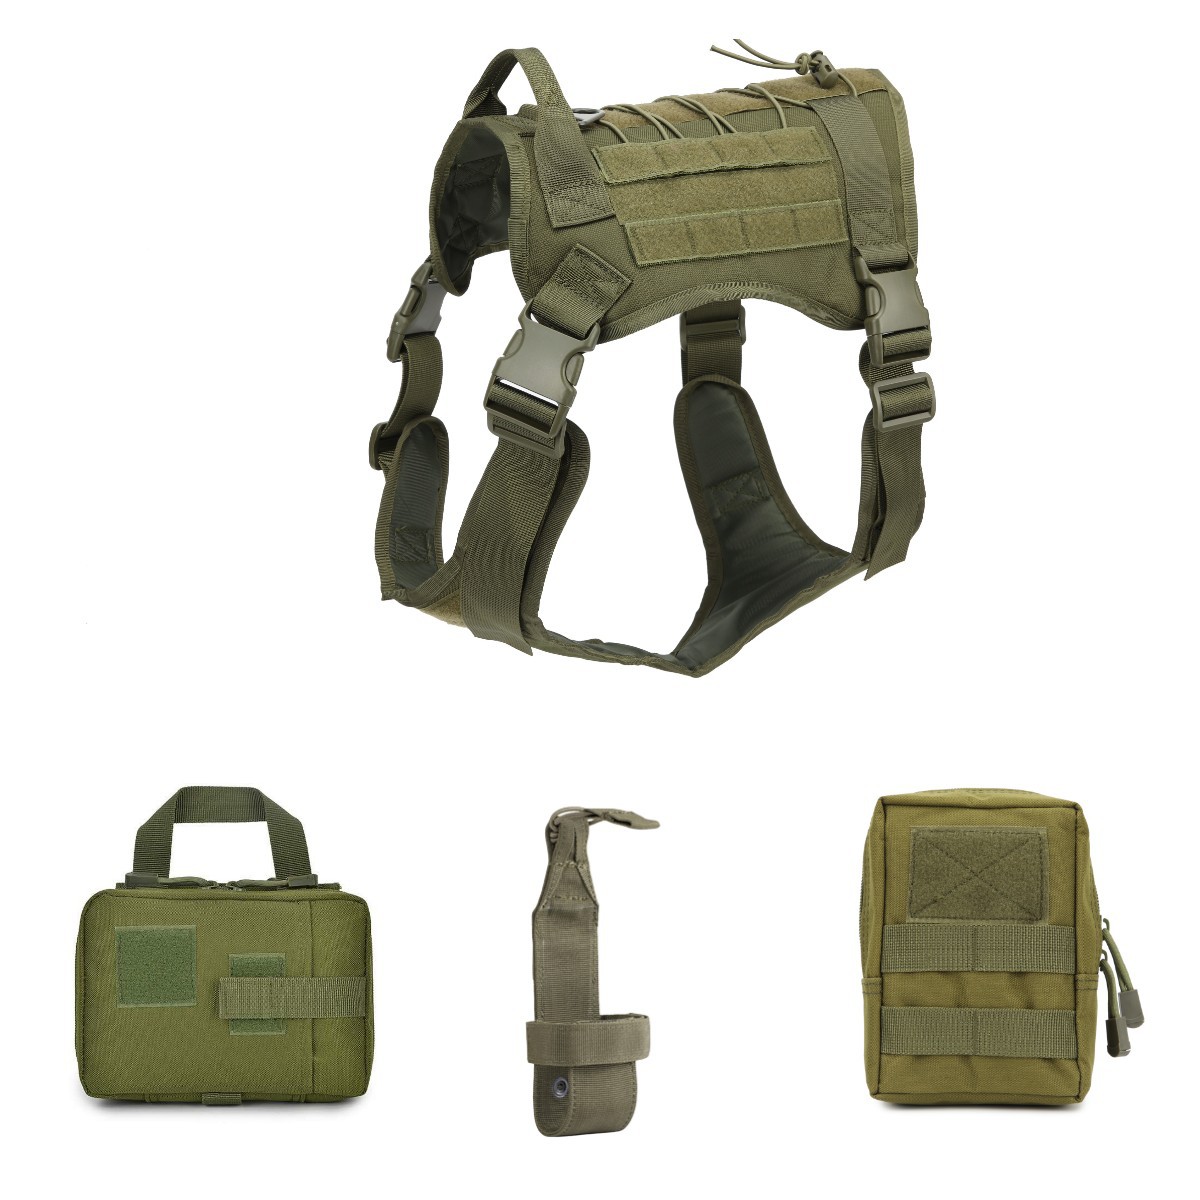 This outdoor tactical dog vest is specially designed as protective gear for working dogs or dogs participating in outdoor activities. It is made of durable nylon material and has multiple attachment points for gear, such as first aid kits, water bottles, and flashlights. The vest provides added protection for the dog and helps to keep them safe during activities such as search and rescue, hiking, or hunting.